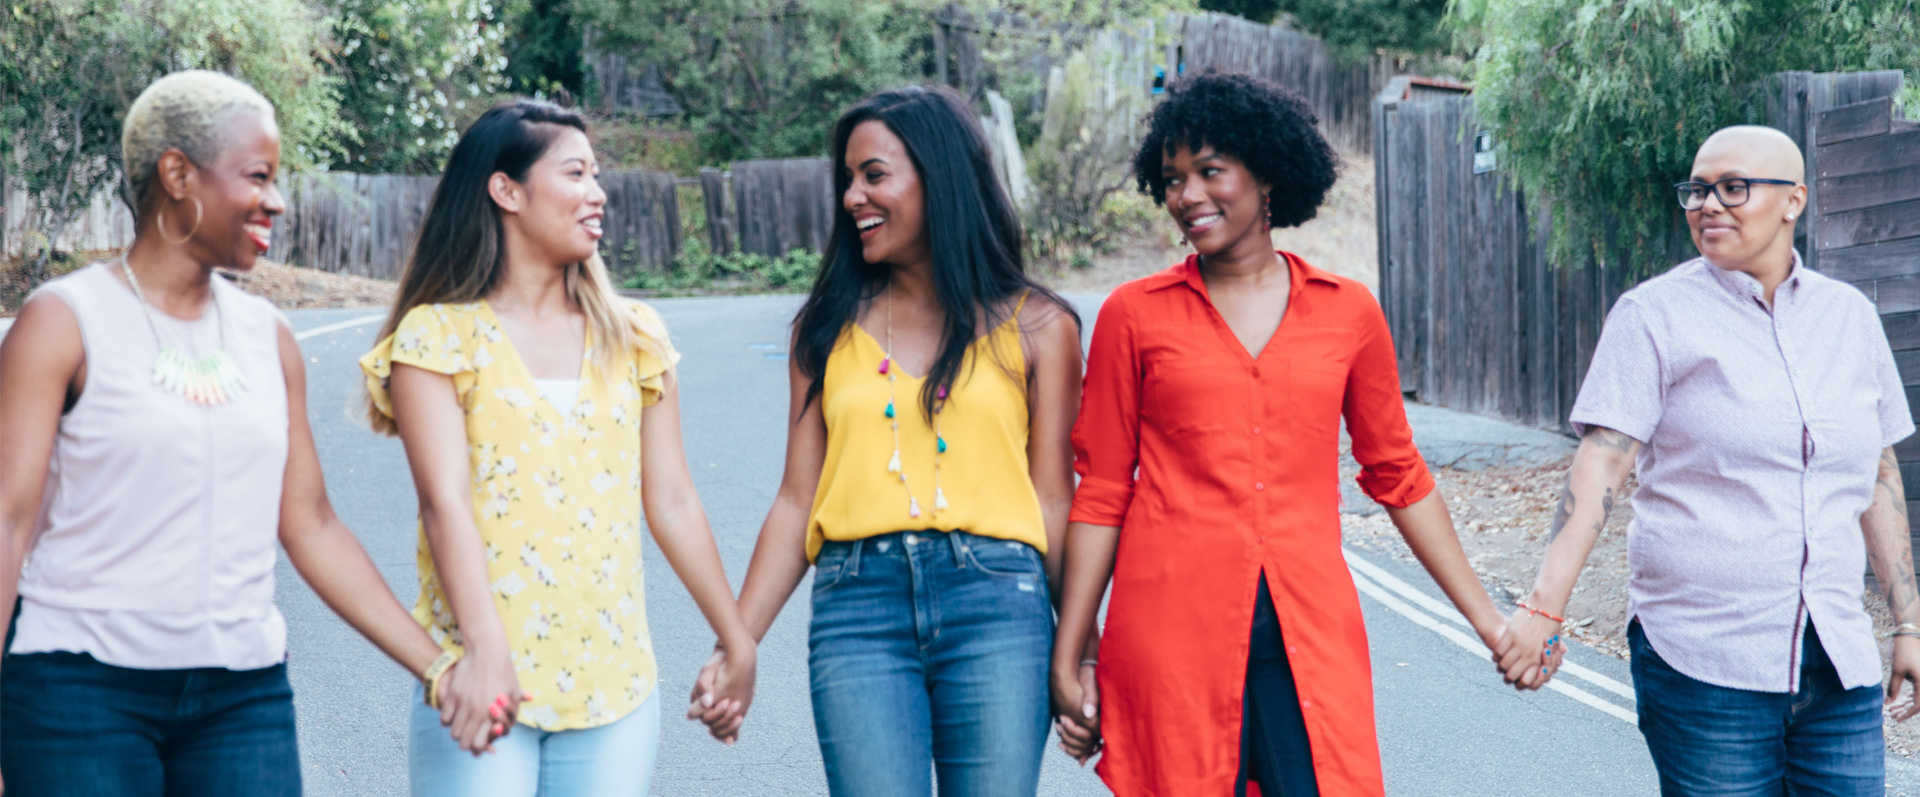 Five women of diverse ethnicities smiling and holding hands while walking outdoors on a road after a counseling session in Sherman Oaks.